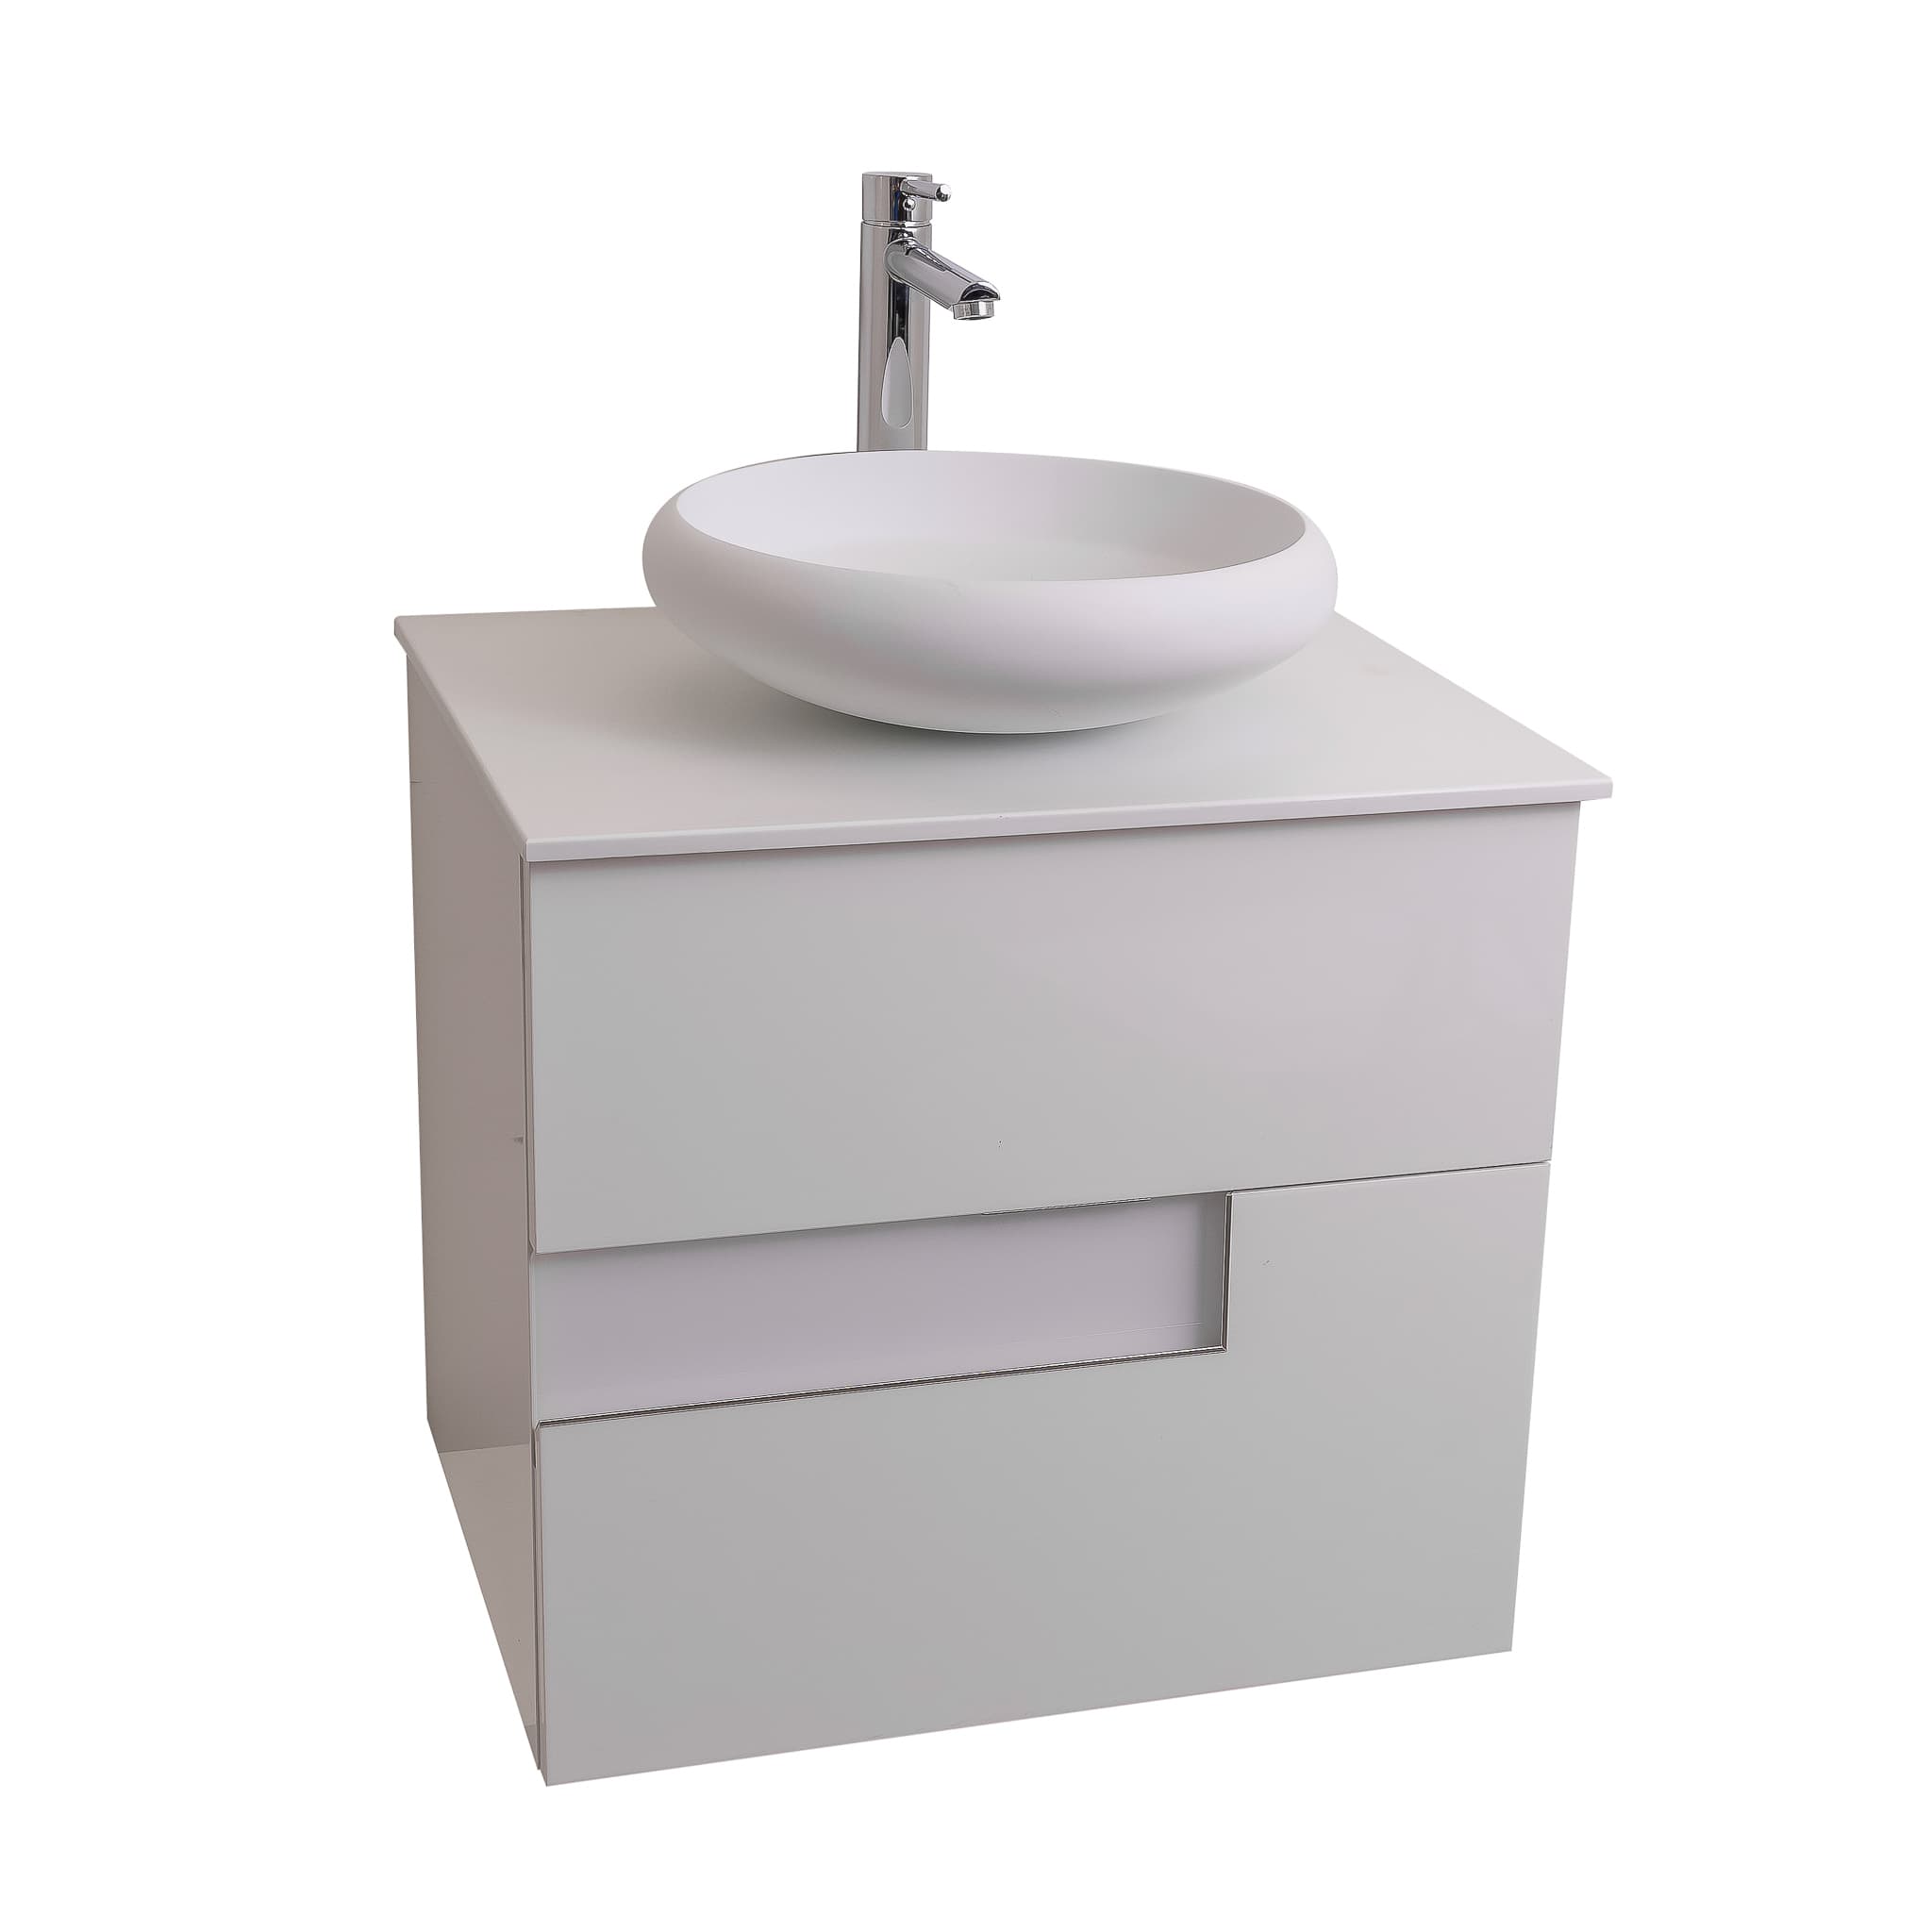 Vision 23.5 White High Gloss Cabinet, Solid Surface Flat White Counter And Round Solid Surface White Basin 1153, Wall Mounted Modern Vanity Set